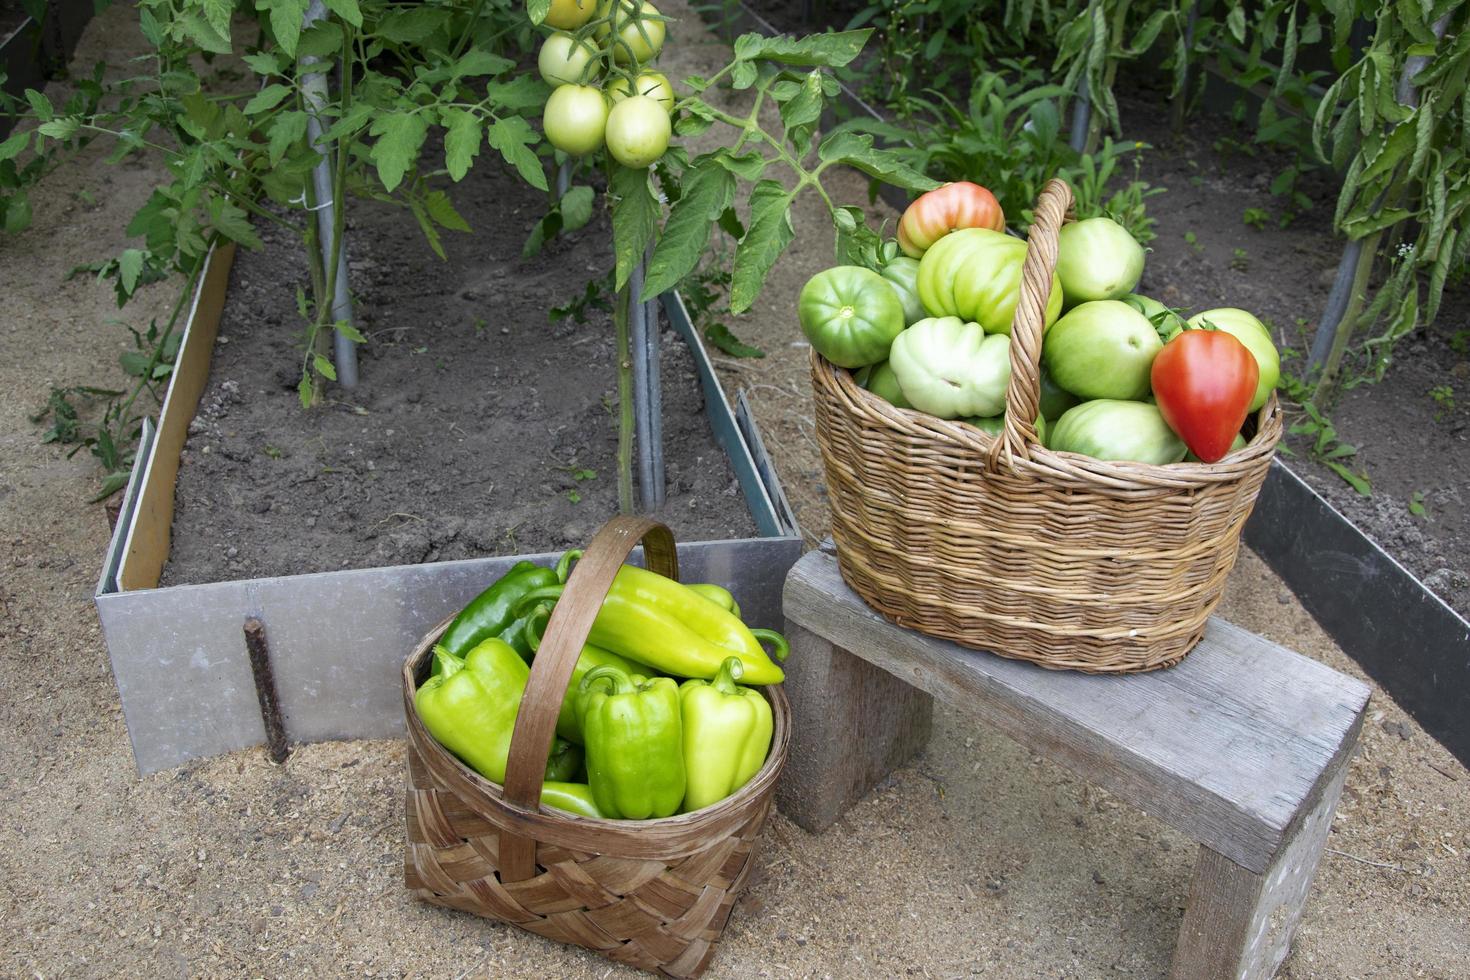 Tomatoes and peppers in wicker baskets close-up photo